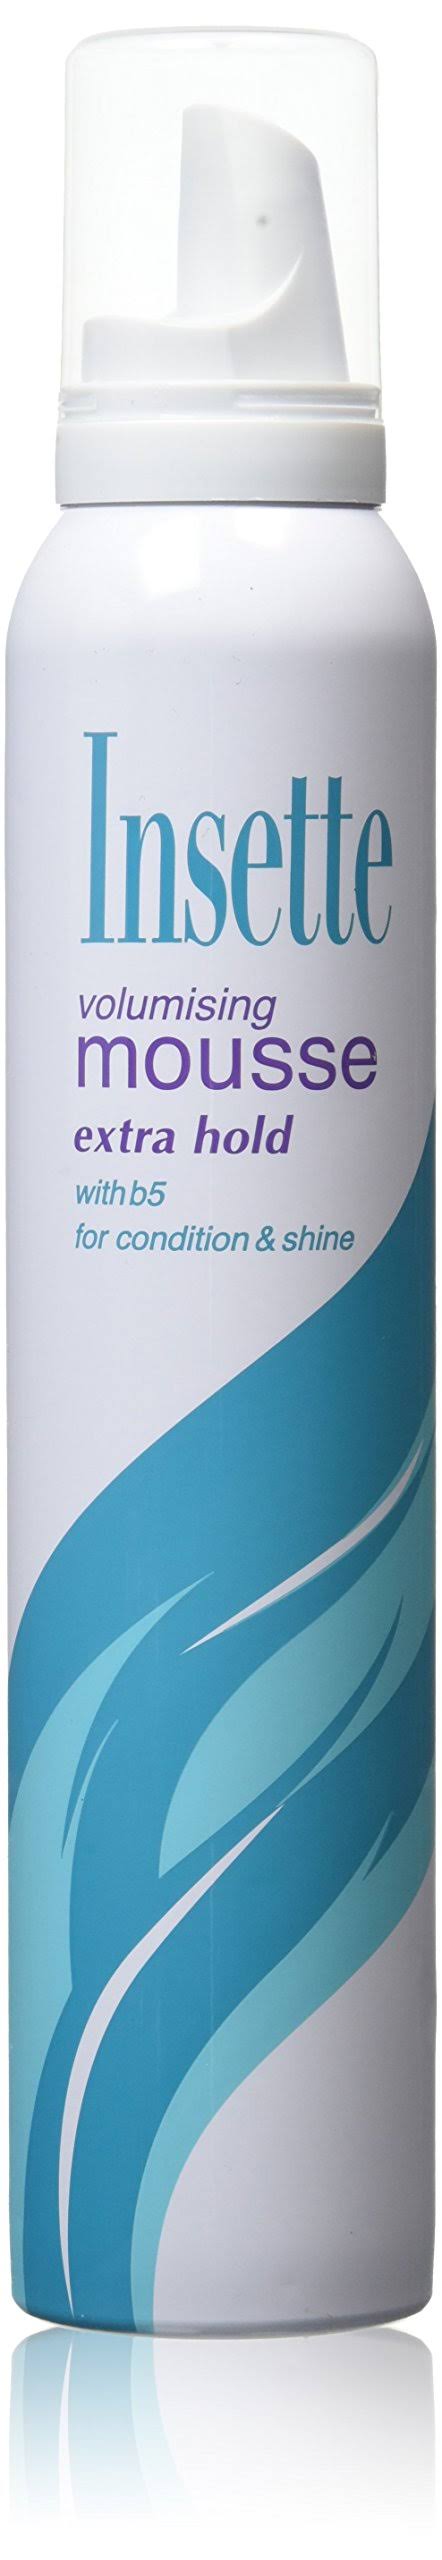 Insette Extra Hold Volumising Mousse 225 ml - Pack of 12